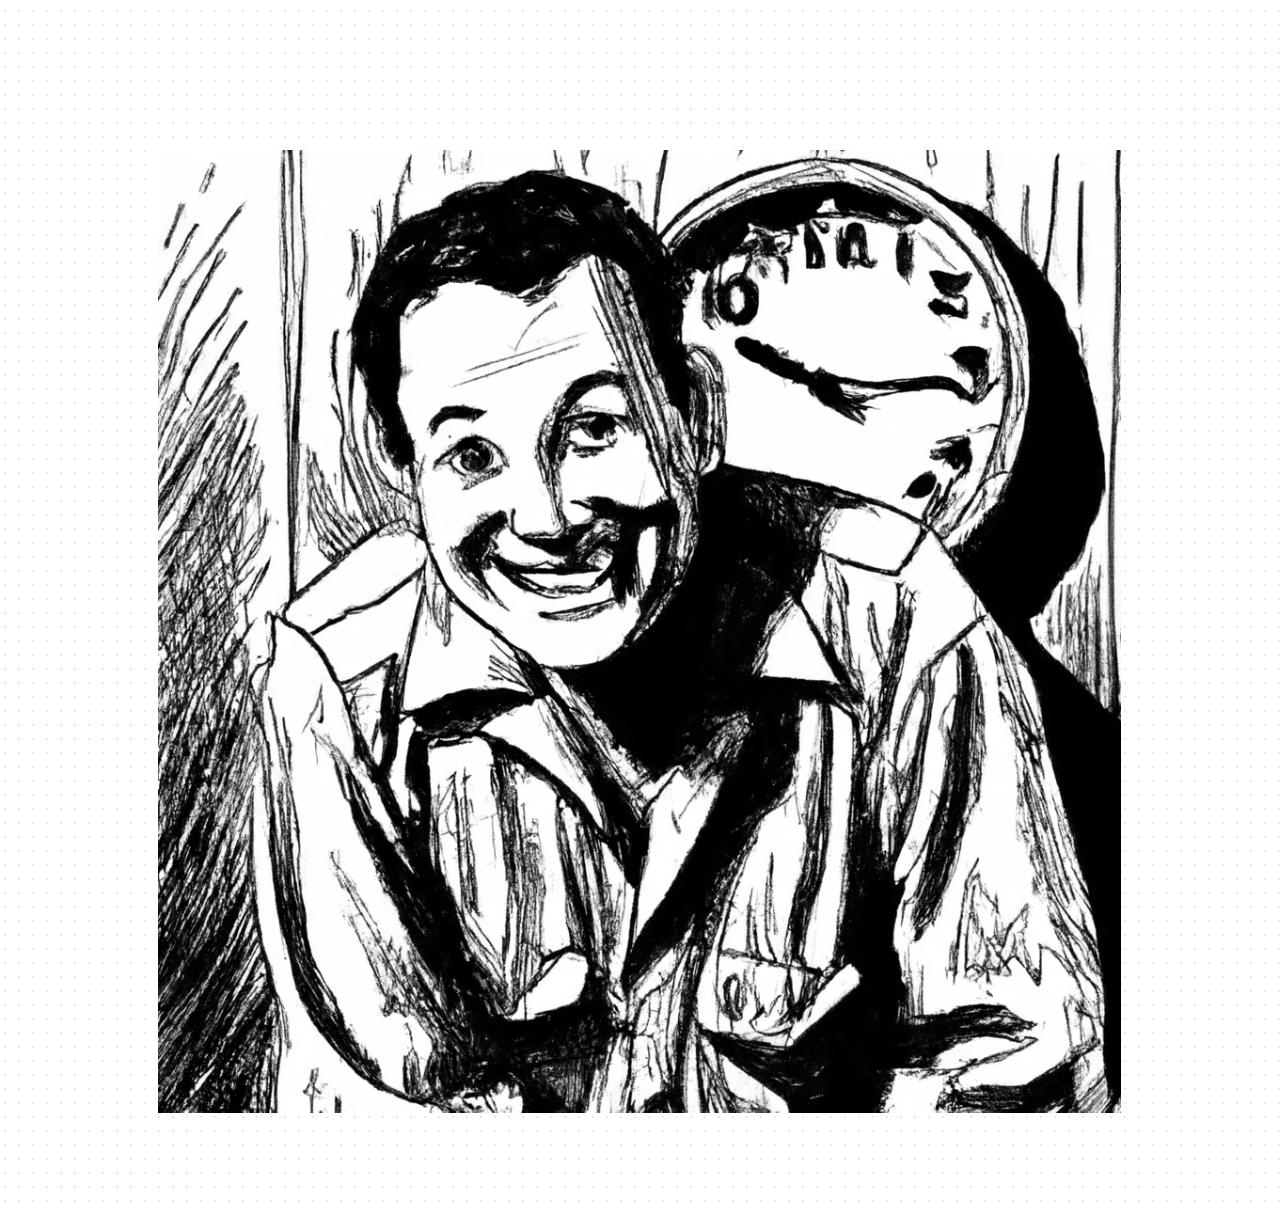 Dall-e2 Query: hatching style, man smiling next to clock